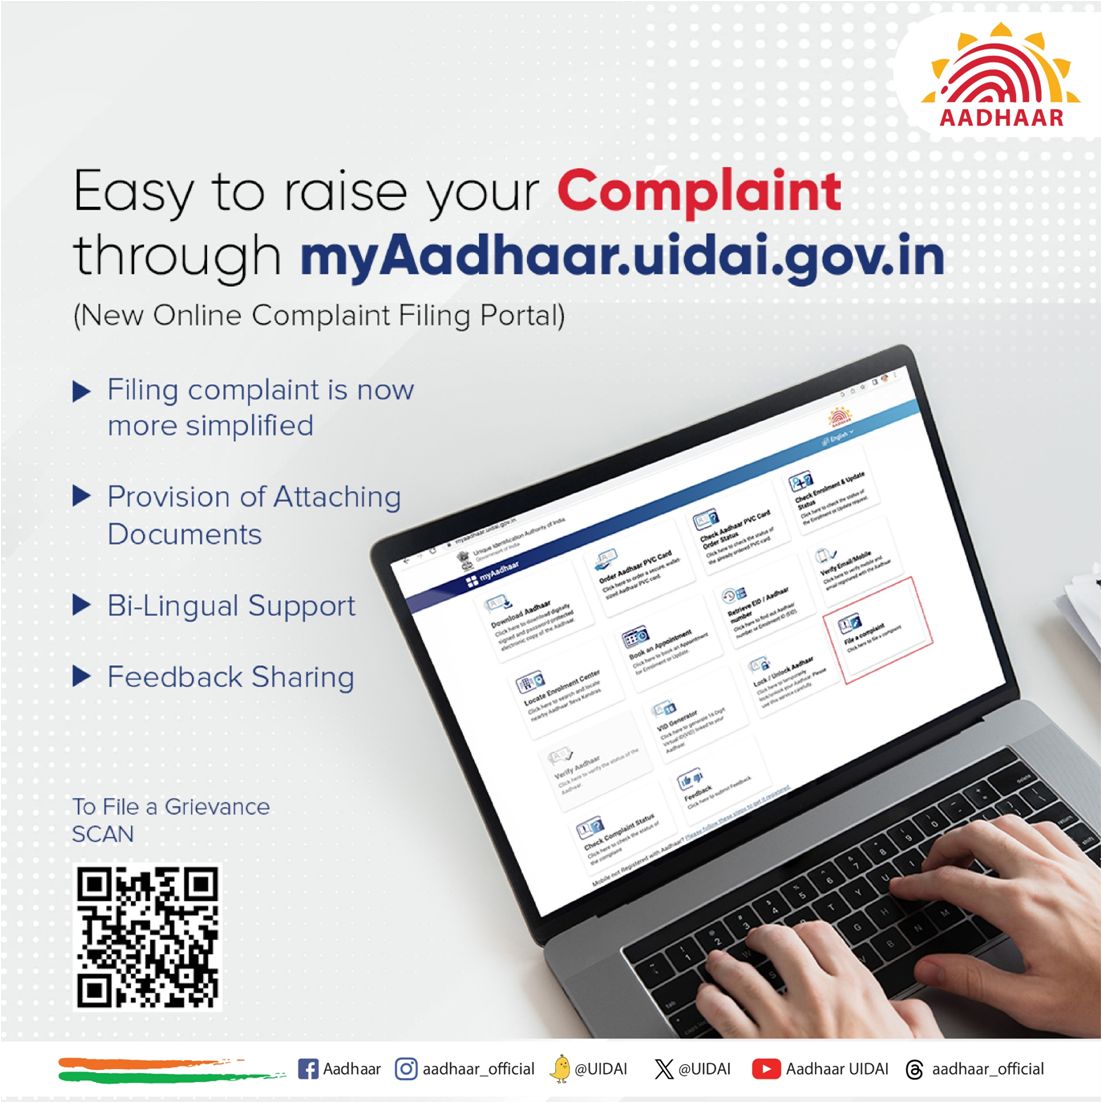 Filing a complaint is now easy with #Aadhaar Individuals can easily file complaints, attach documents, & receive bilingual support. To file a complaint, visit myaadhaar.uidai.gov.in/file-complaint